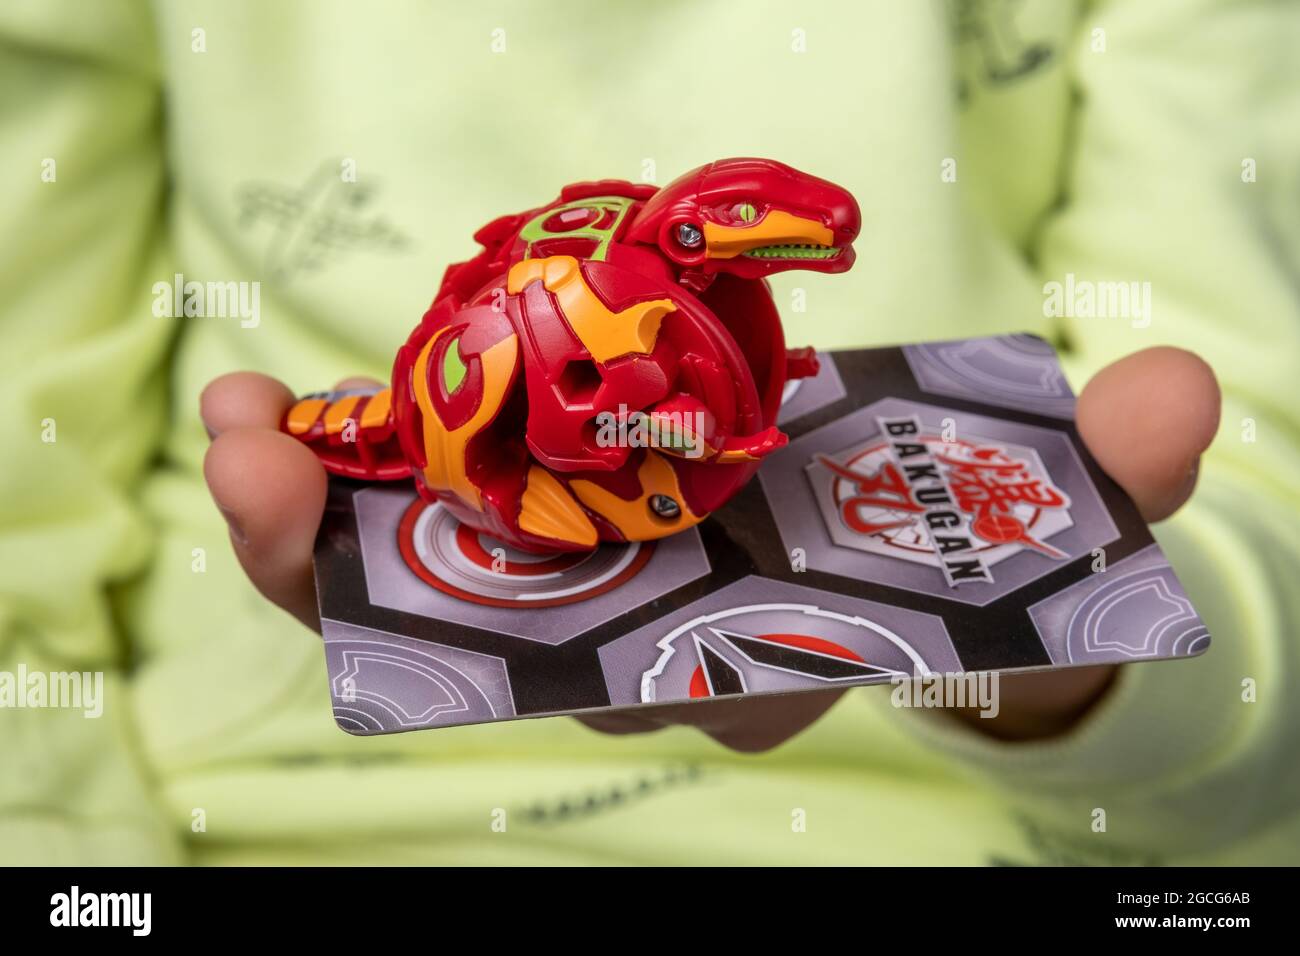 Pelmel princip Rasende Bakugan Ball toy. Toy transformed in a dragon shape, hold in child's hand  with magnetic card. Stafford, United Kingdom, August 8, 2021 Stock Photo -  Alamy